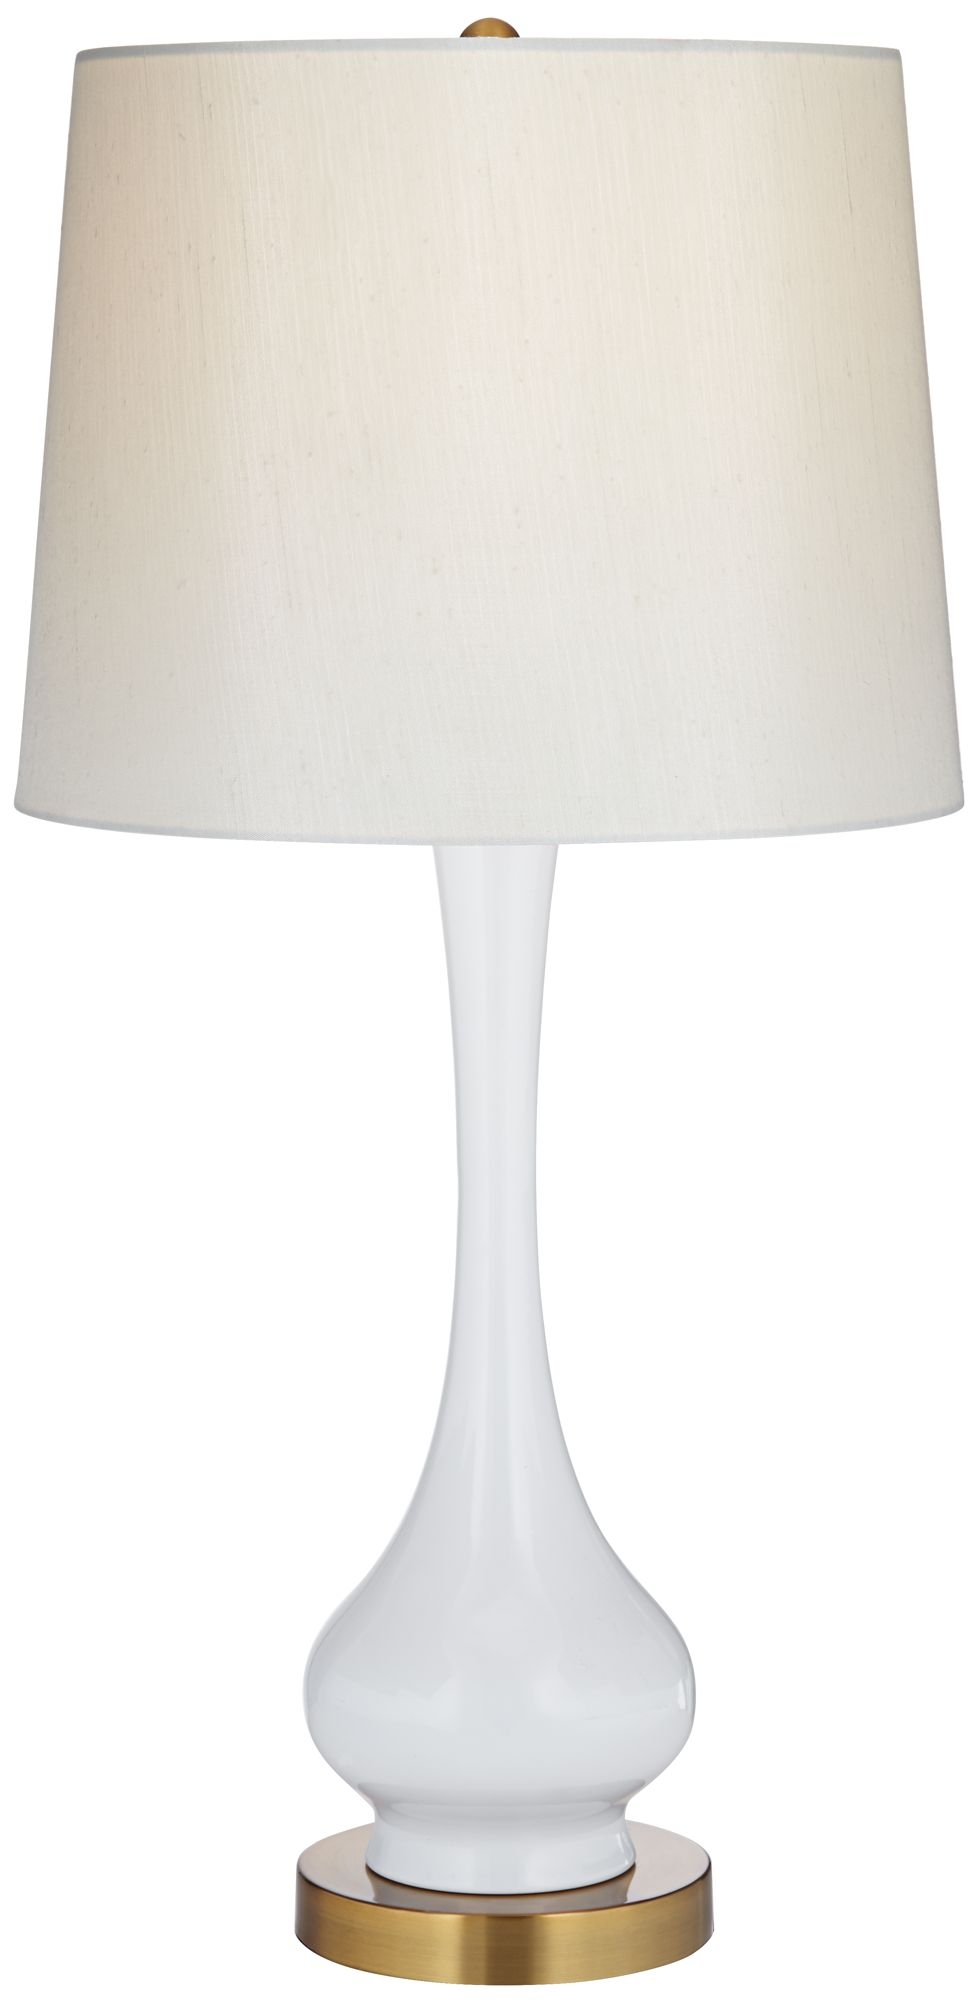 Lula White and Brass Gourd Table Lamp - Image 0